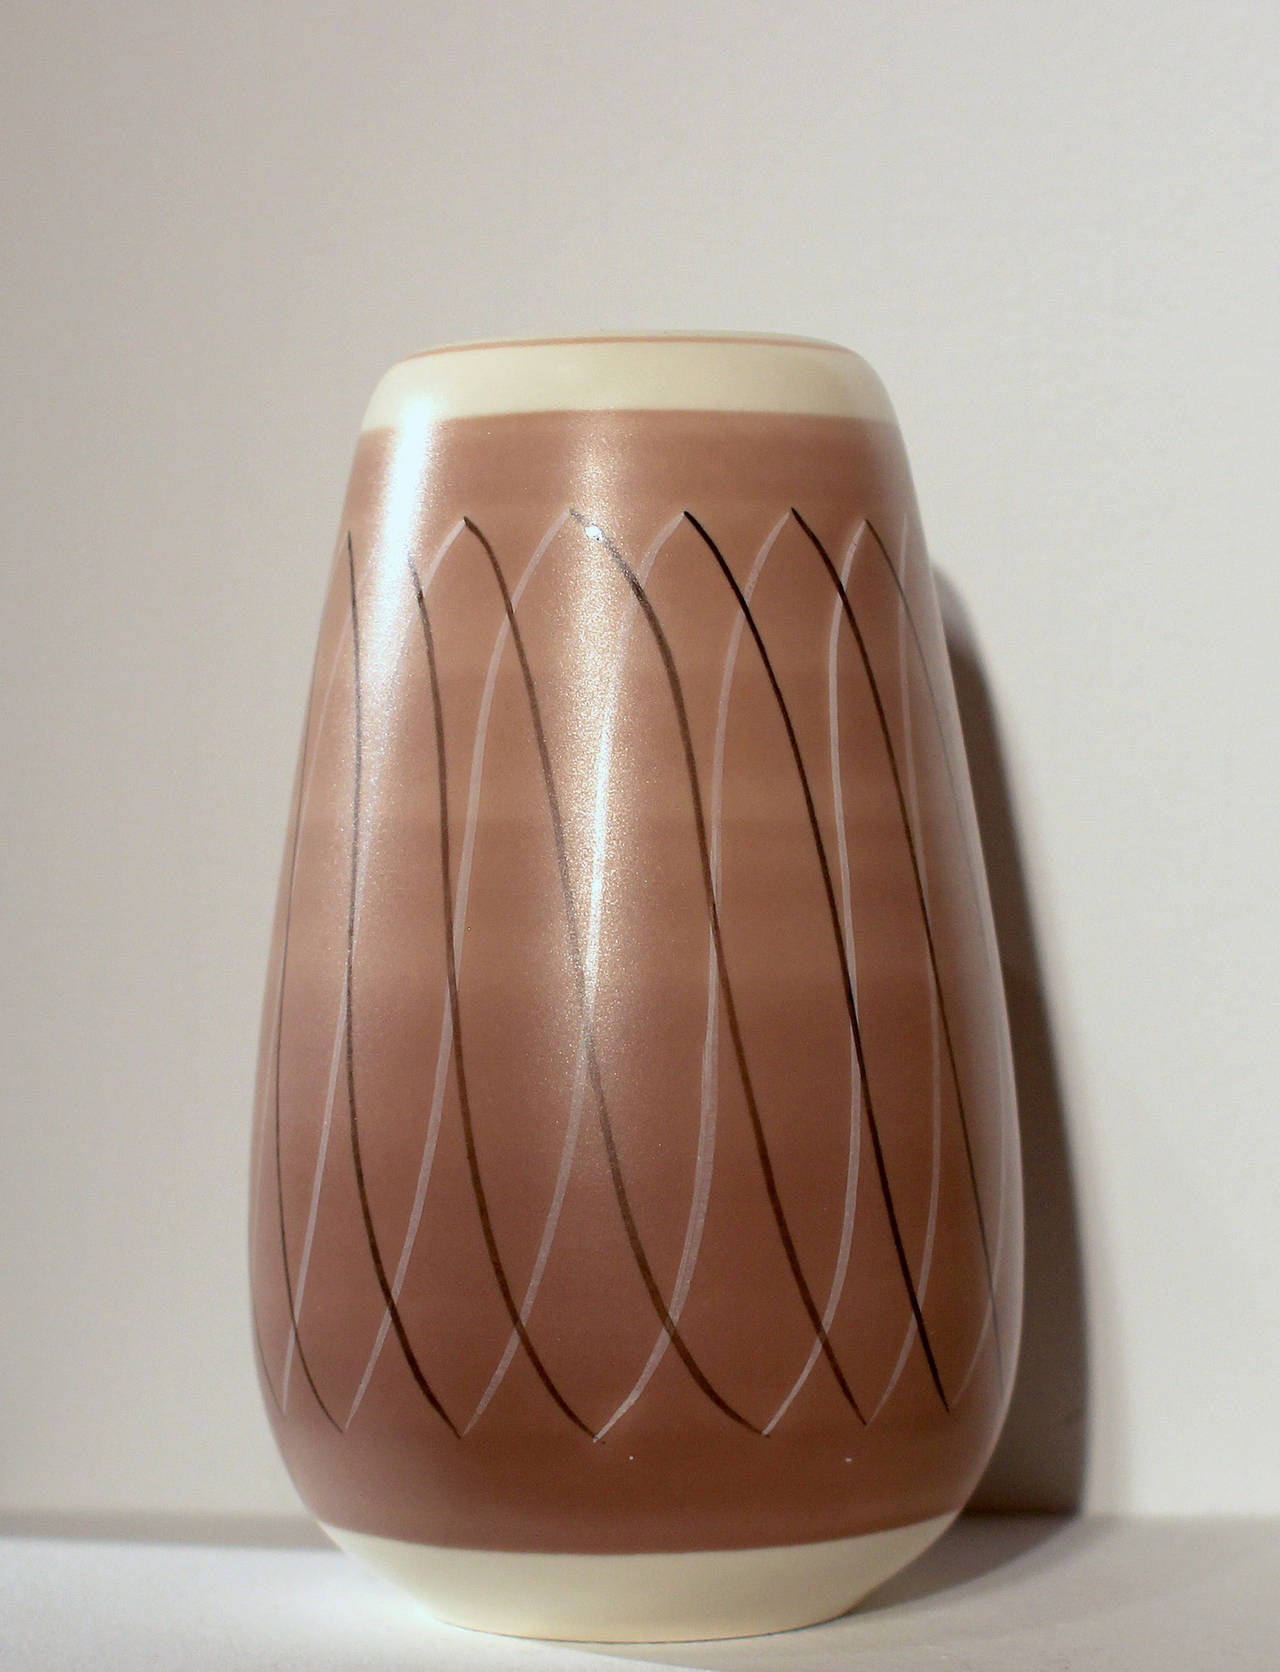 1950s free-form Poole Pottery in modernist painted designs.

Starting out as a tile manufacturer in the 19th century, the Poole company developed outstanding glazing techniques and interesting forms. In the 1950s, after the wartime restrictions